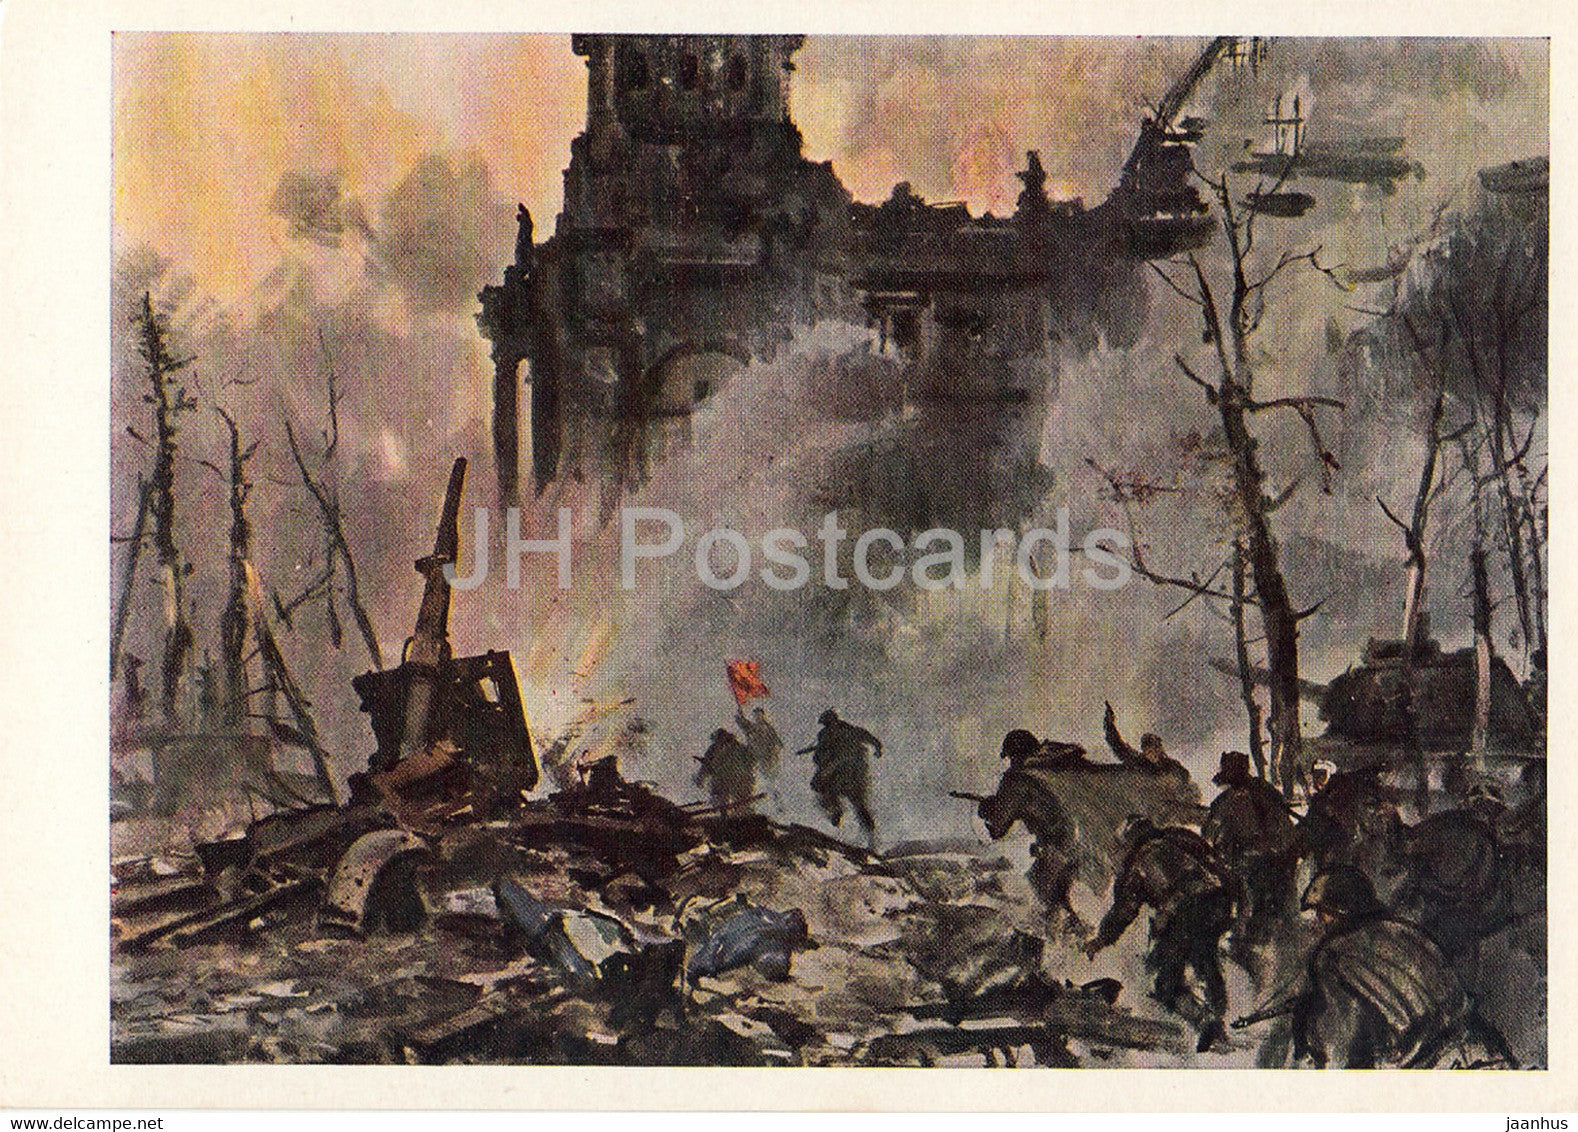 Guarding the World - painting by V. Bogatkin - Storming of the Reichstag - military - art - 1965 - Russia USSR - unused - JH Postcards